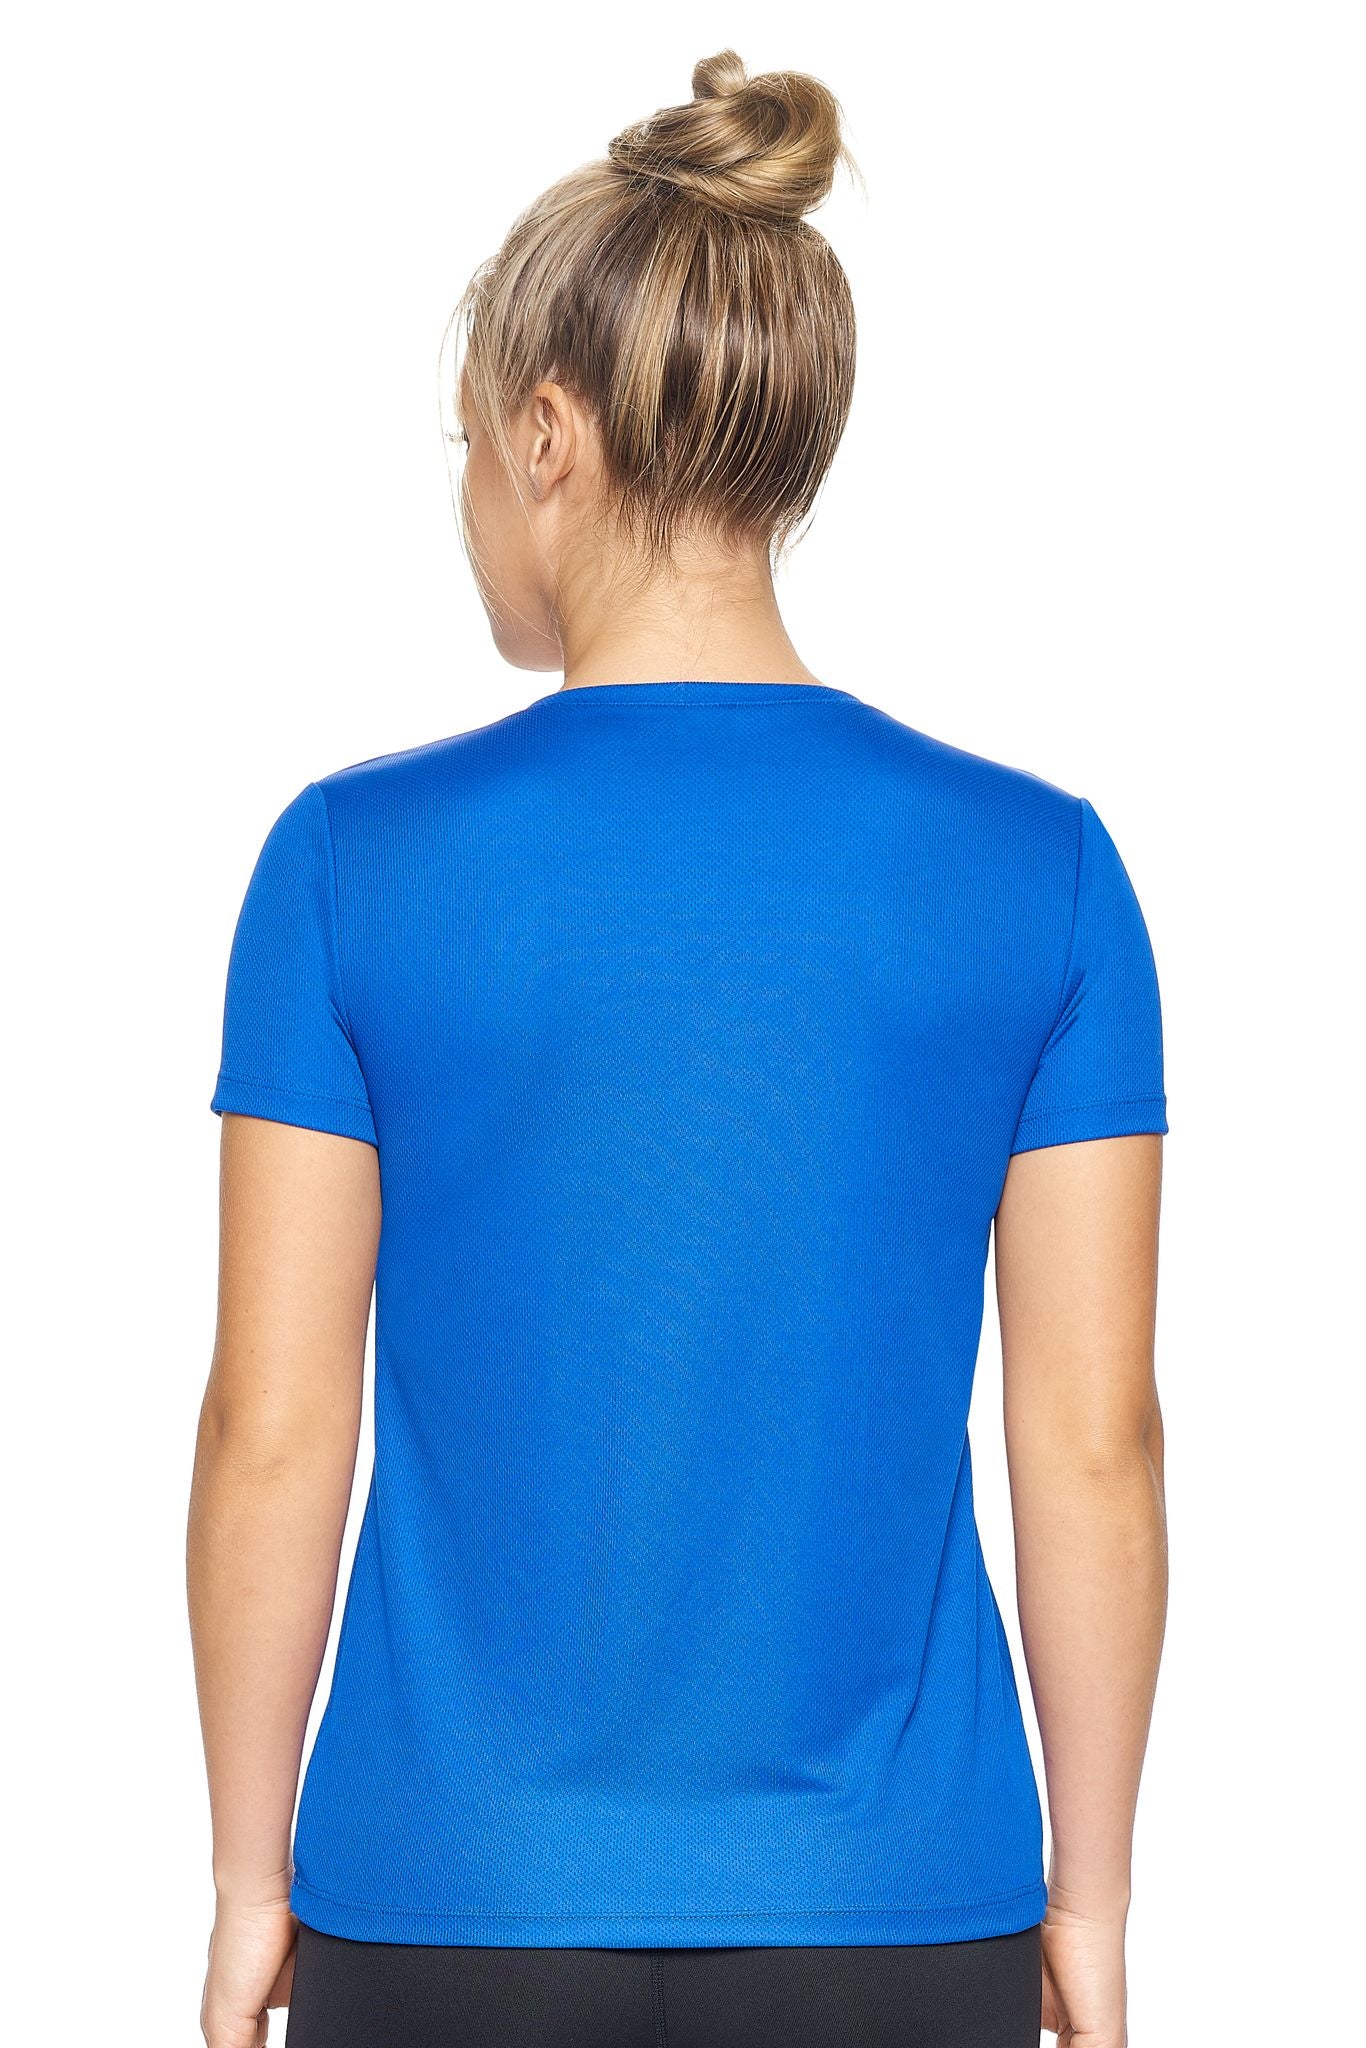 Expert Brand Retail Made in USA Sportswear Activewear Women's Short Sleeve V-neck Tec Tee Oxymesh royal blue 3#color_royal-blue